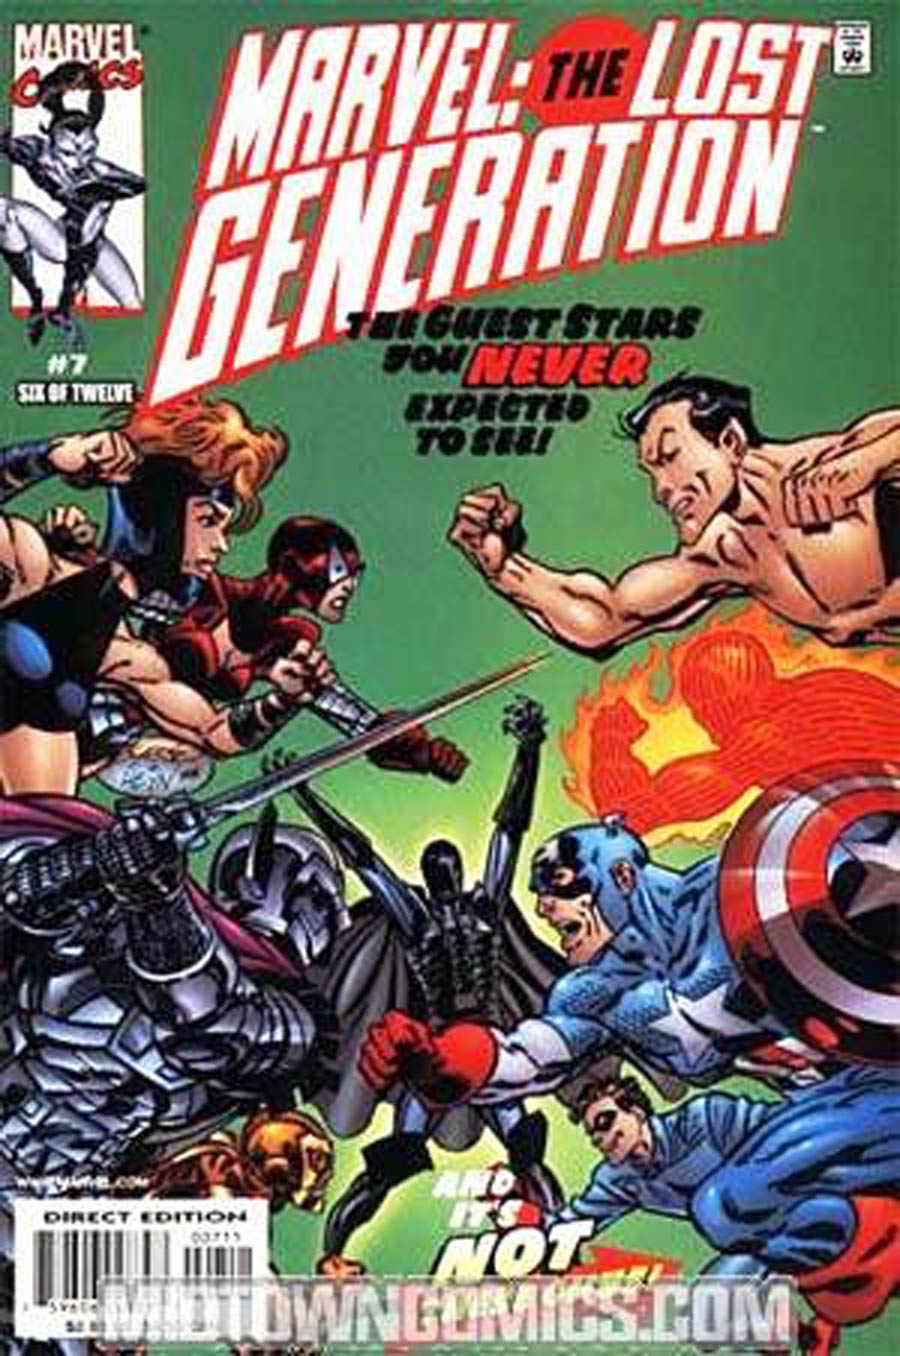 Marvel The Lost Generation #7